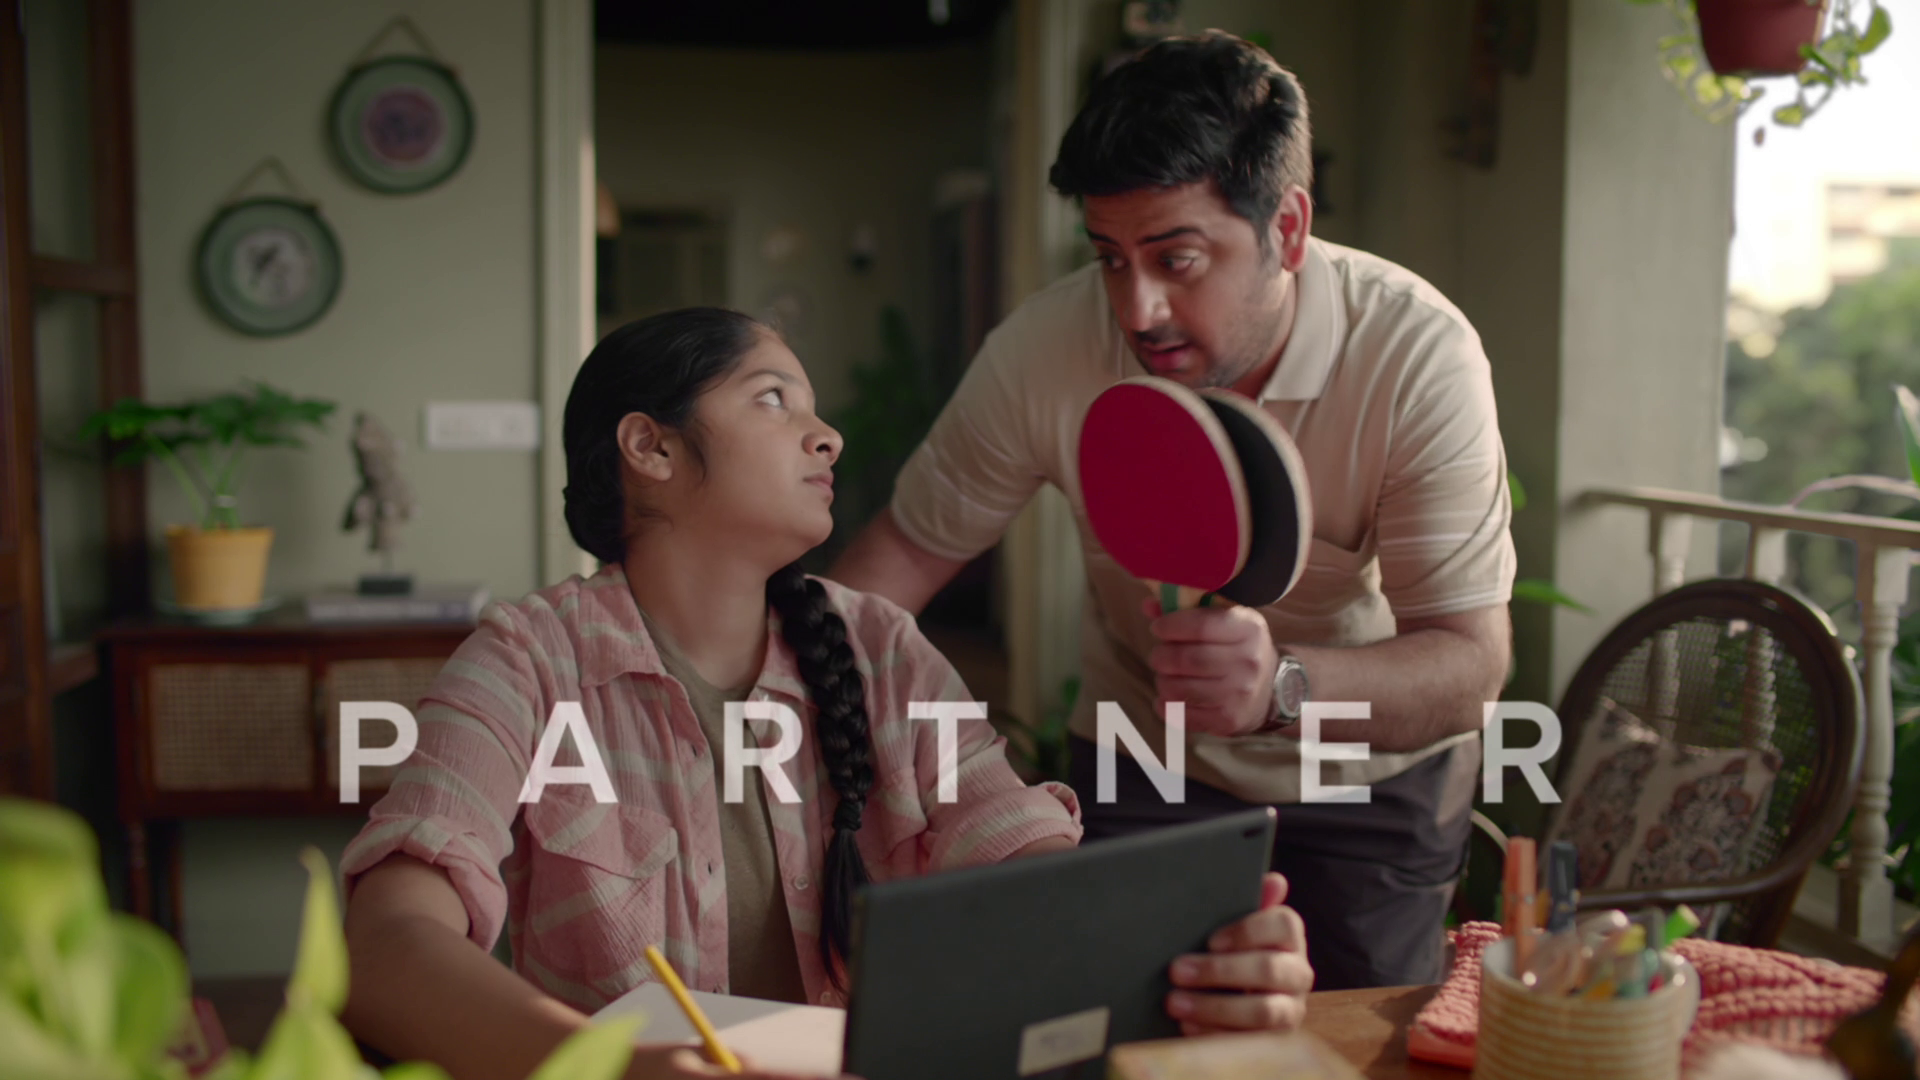 Byjus - Table Tennis